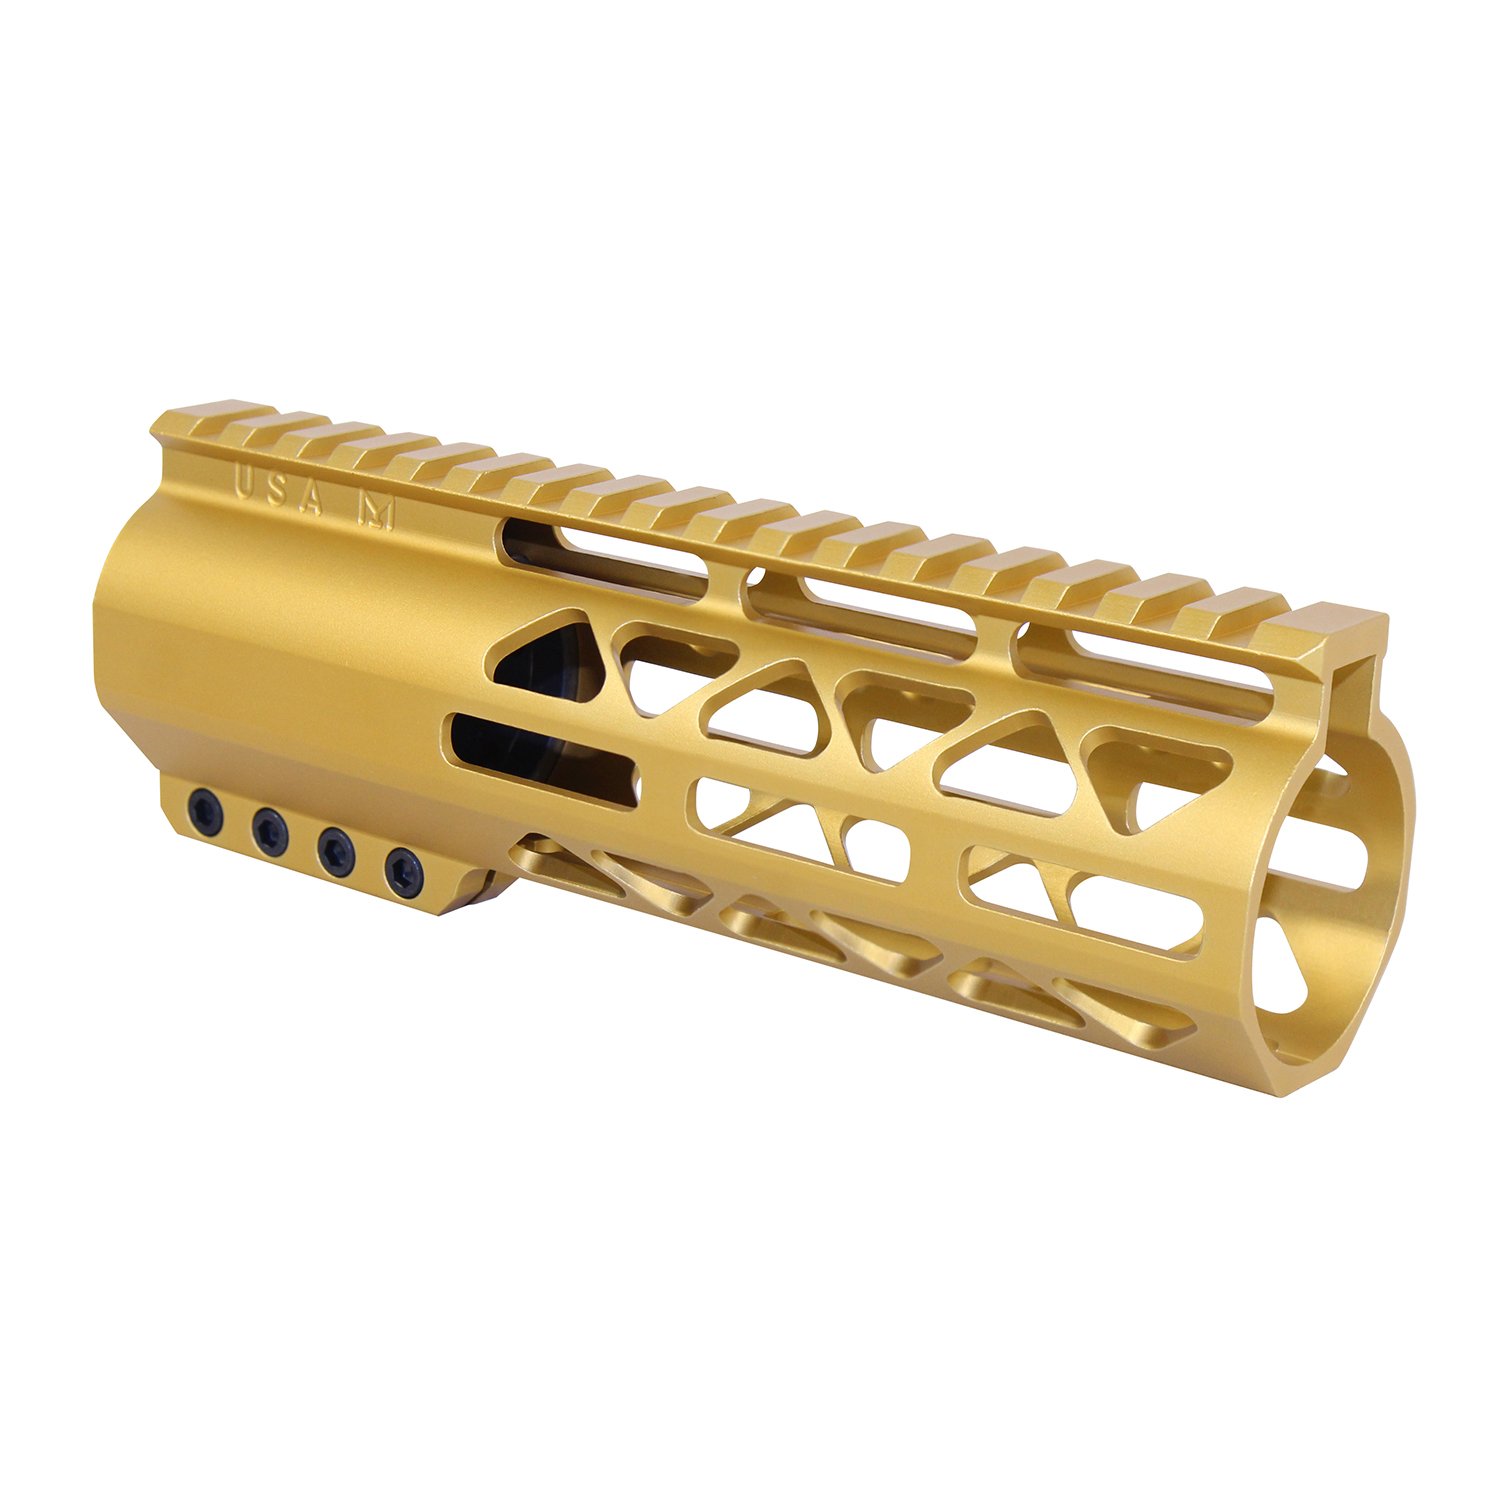 7" AIR-LOK Series M-LOK Compression Free Floating Handguard With Monolithic Top Rail (.308 Cal) (Anodized Gold)